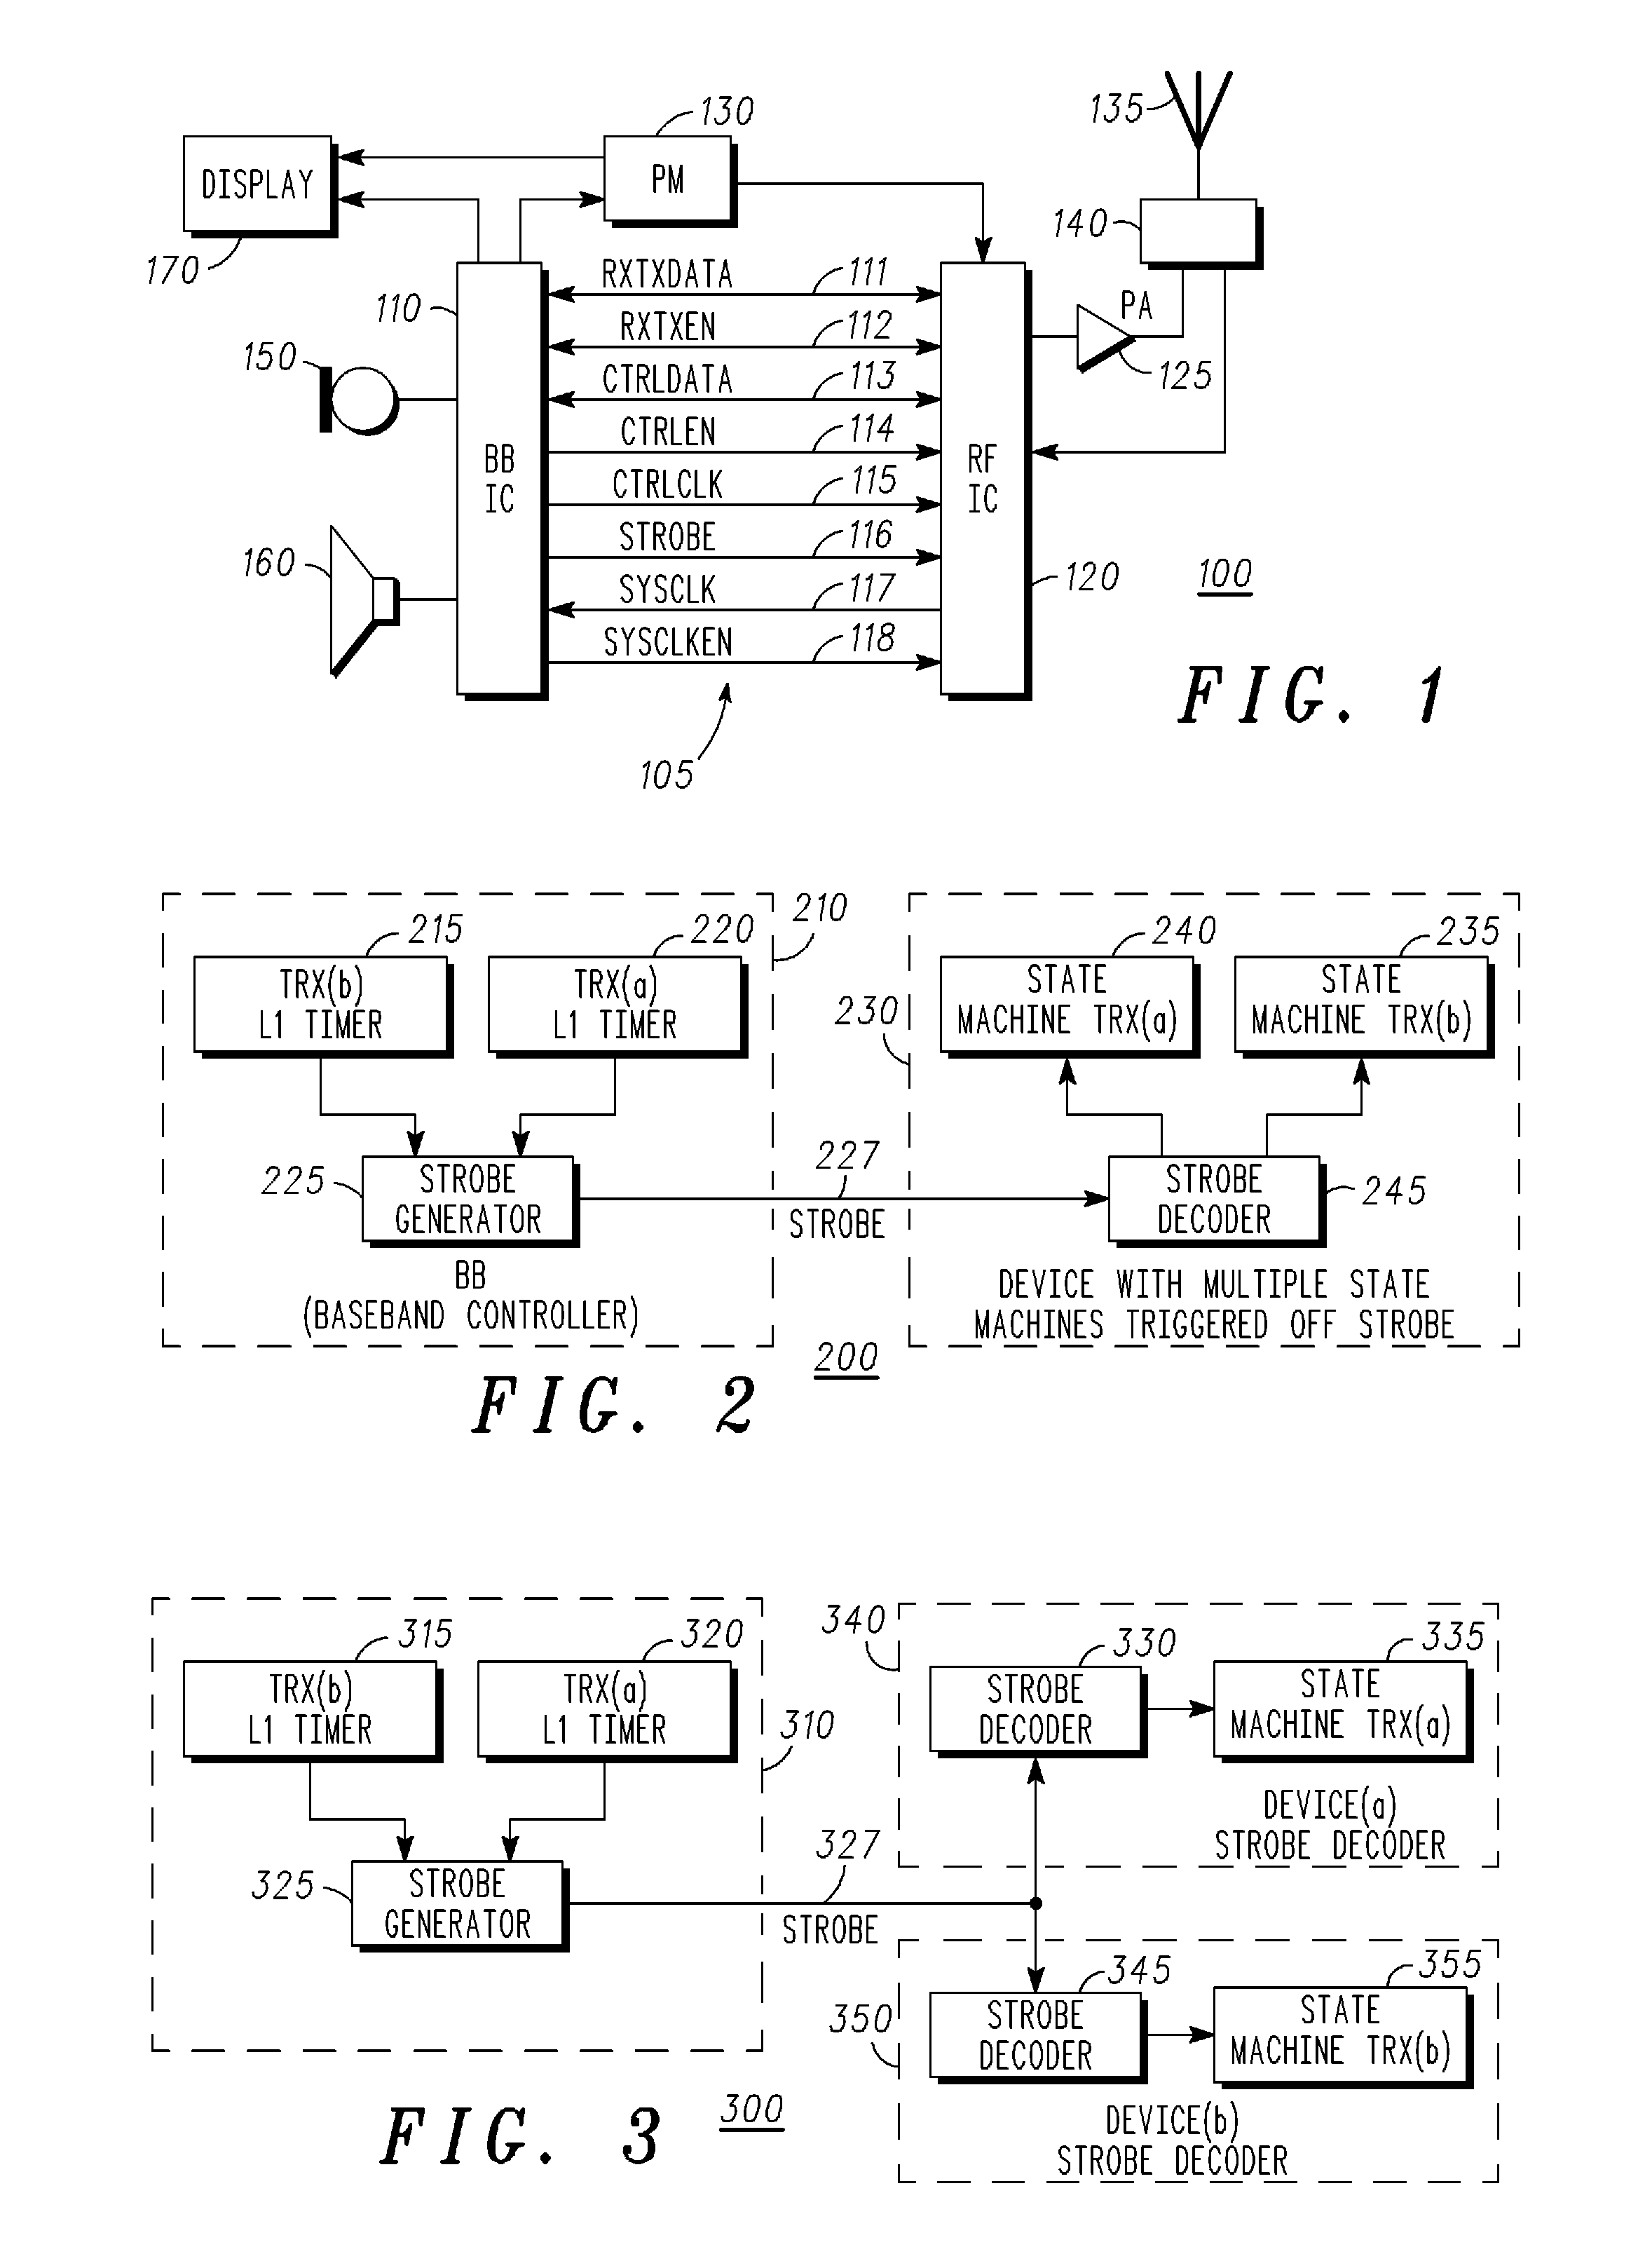 Apparatus and control interface therefor